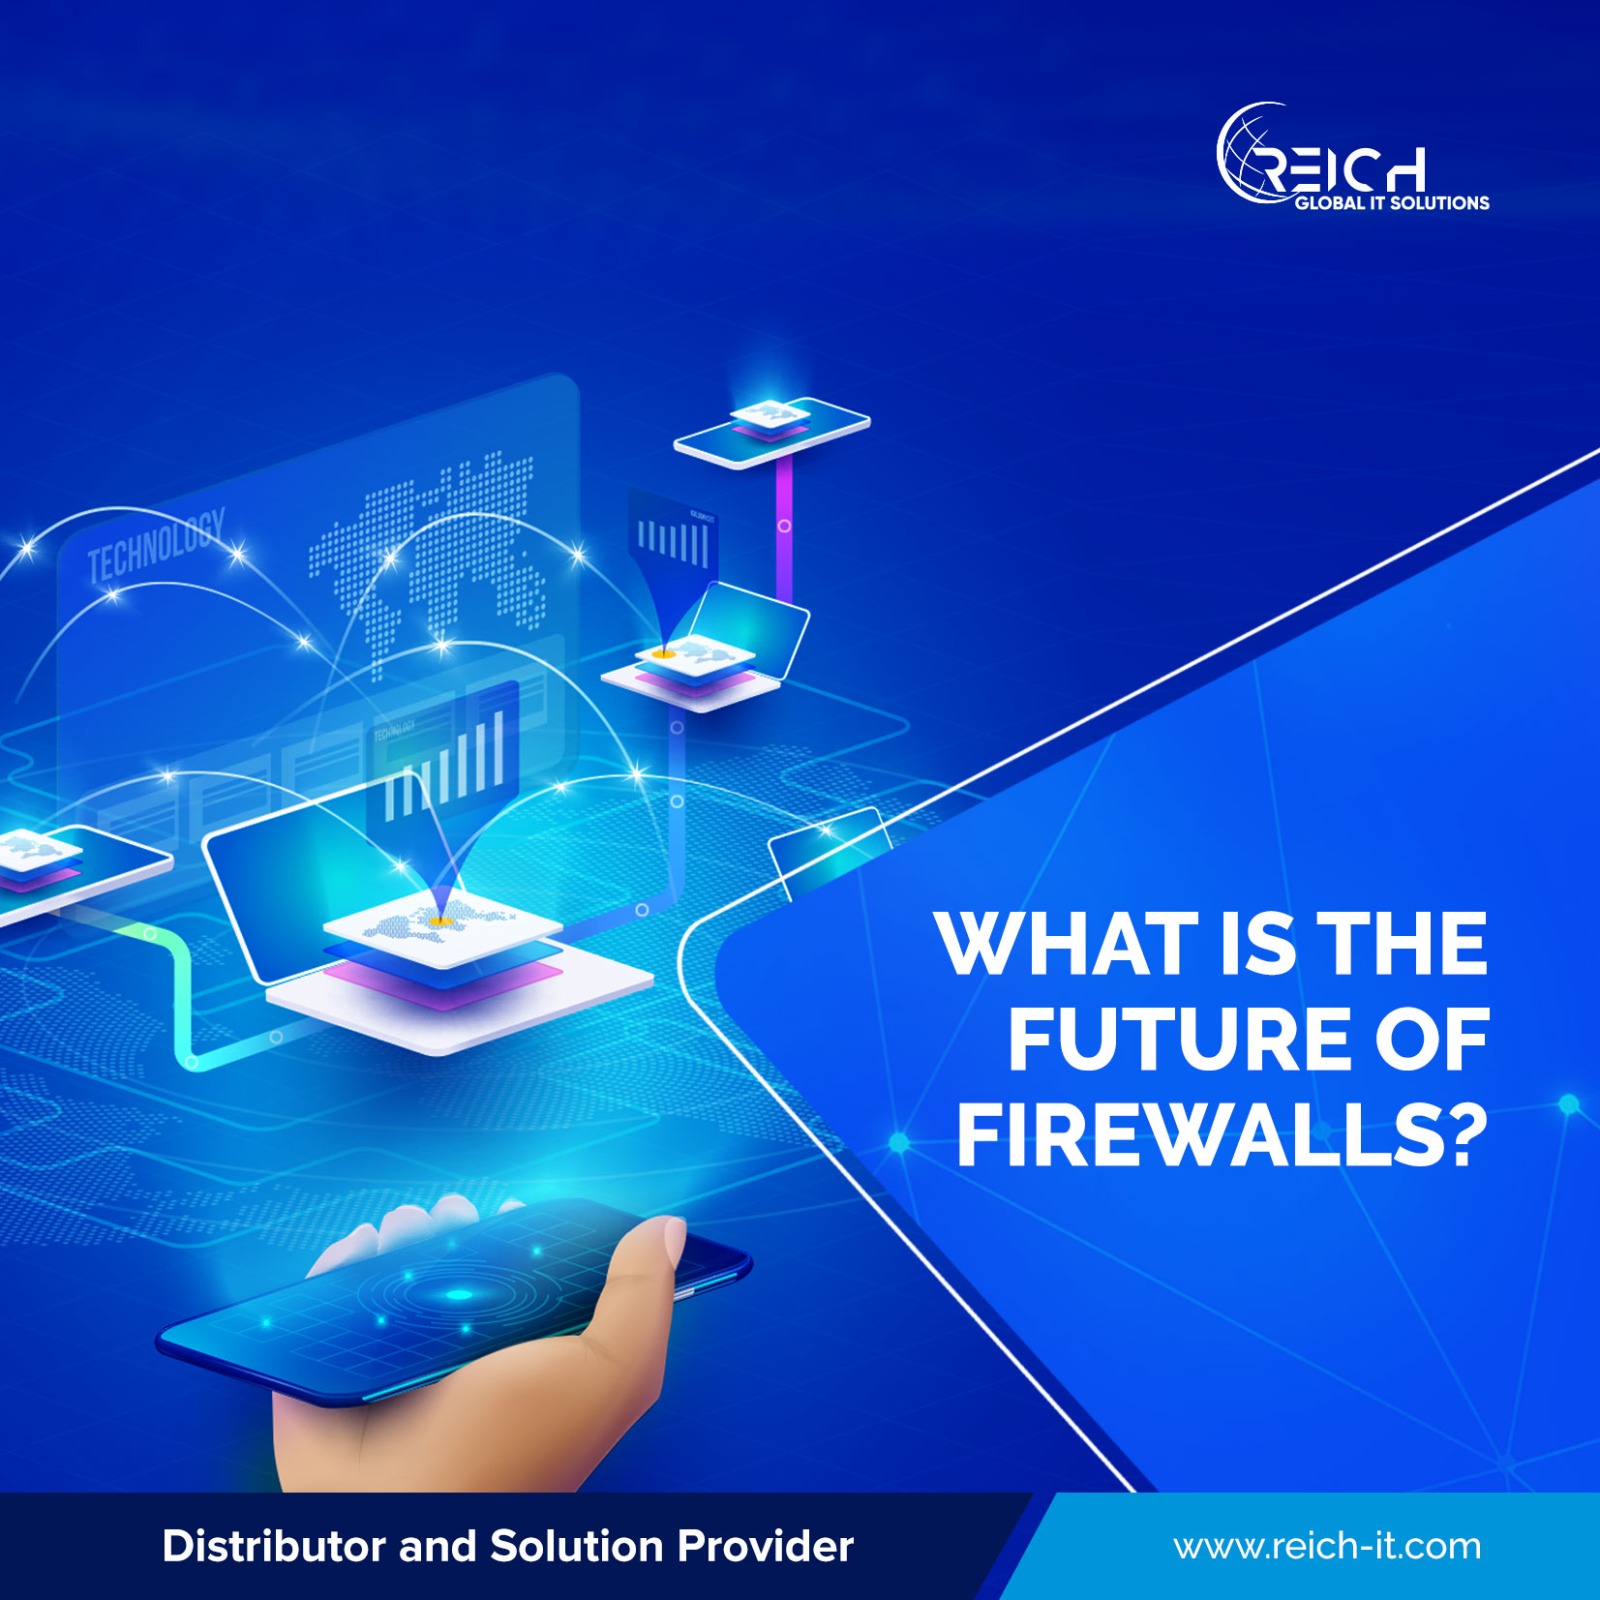 What is the future of firewalls?